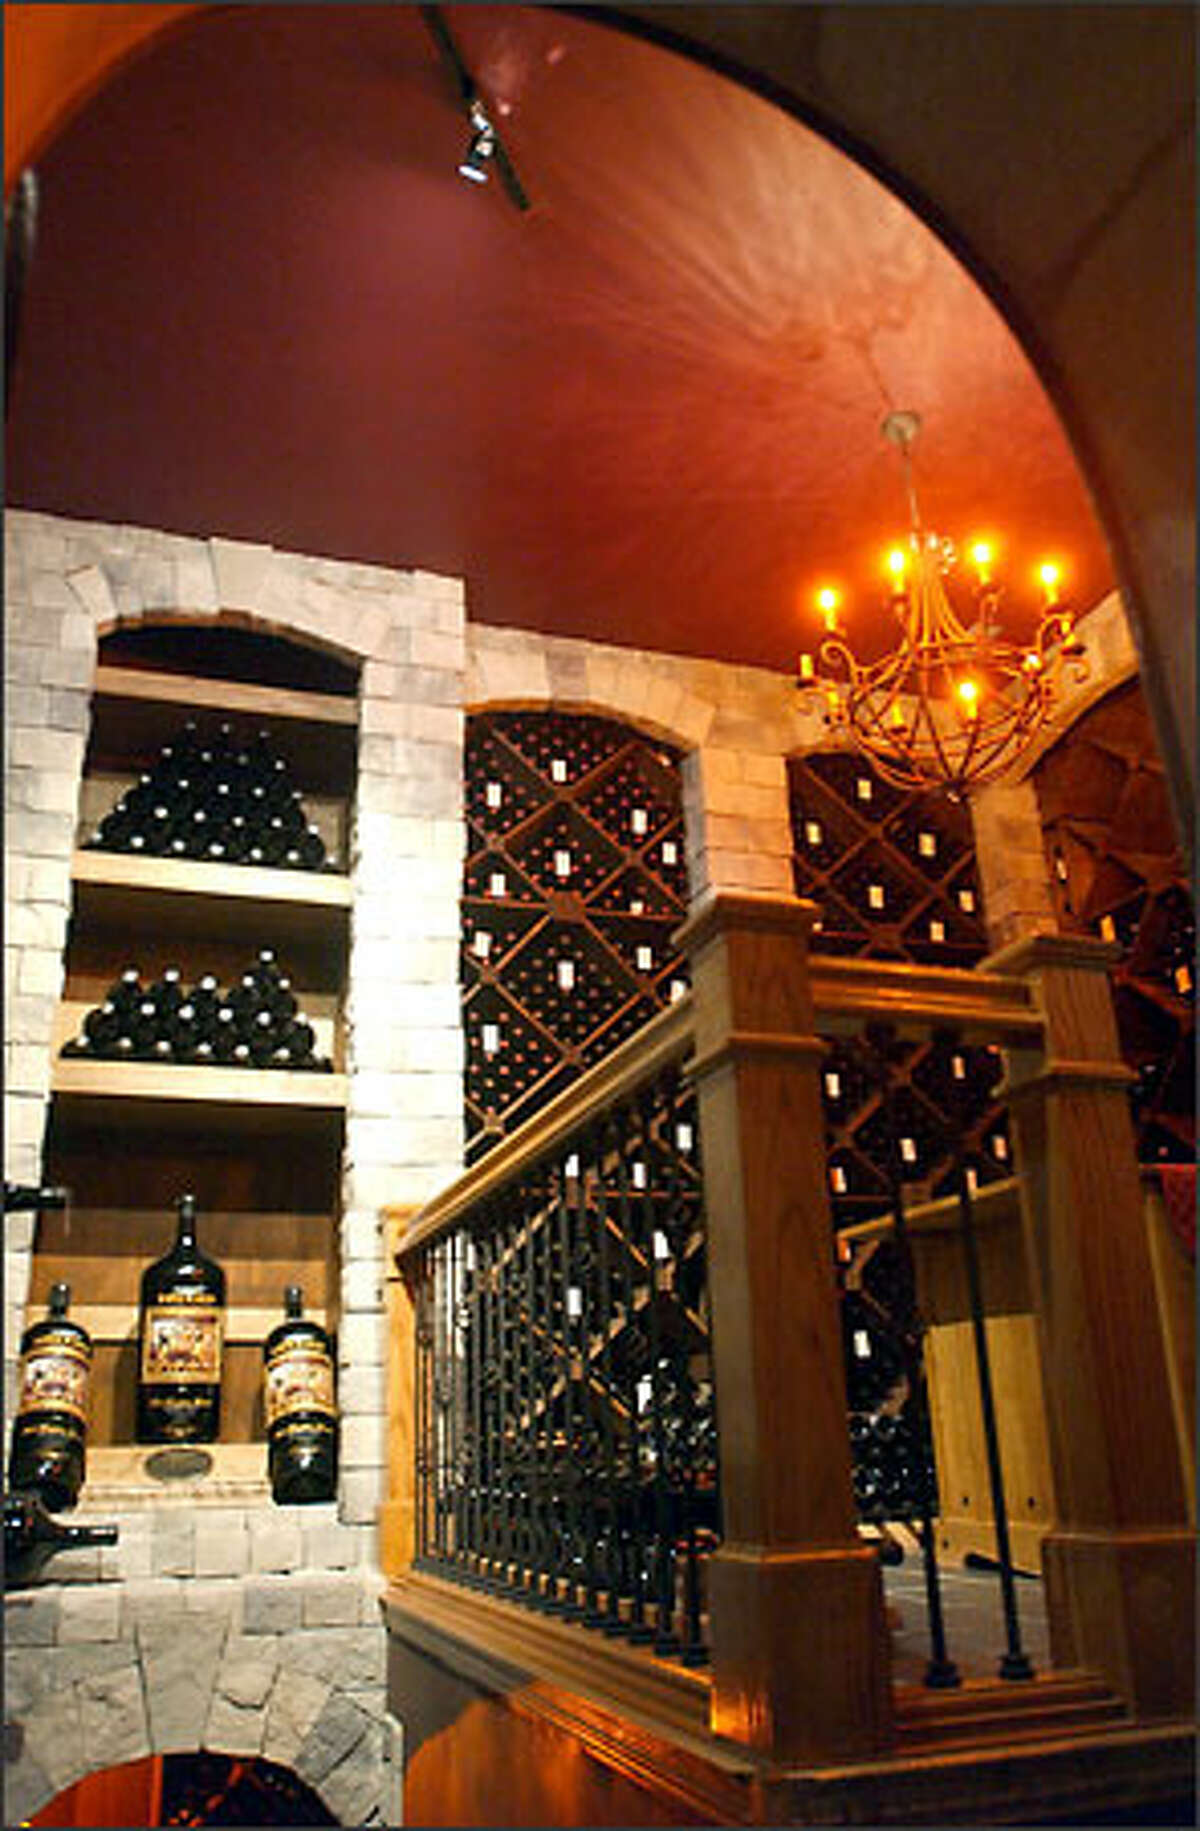 Subtle lighting sets the tone of the wine library at Hedges Cellars tasting facility on Red Mountain near Benton City.